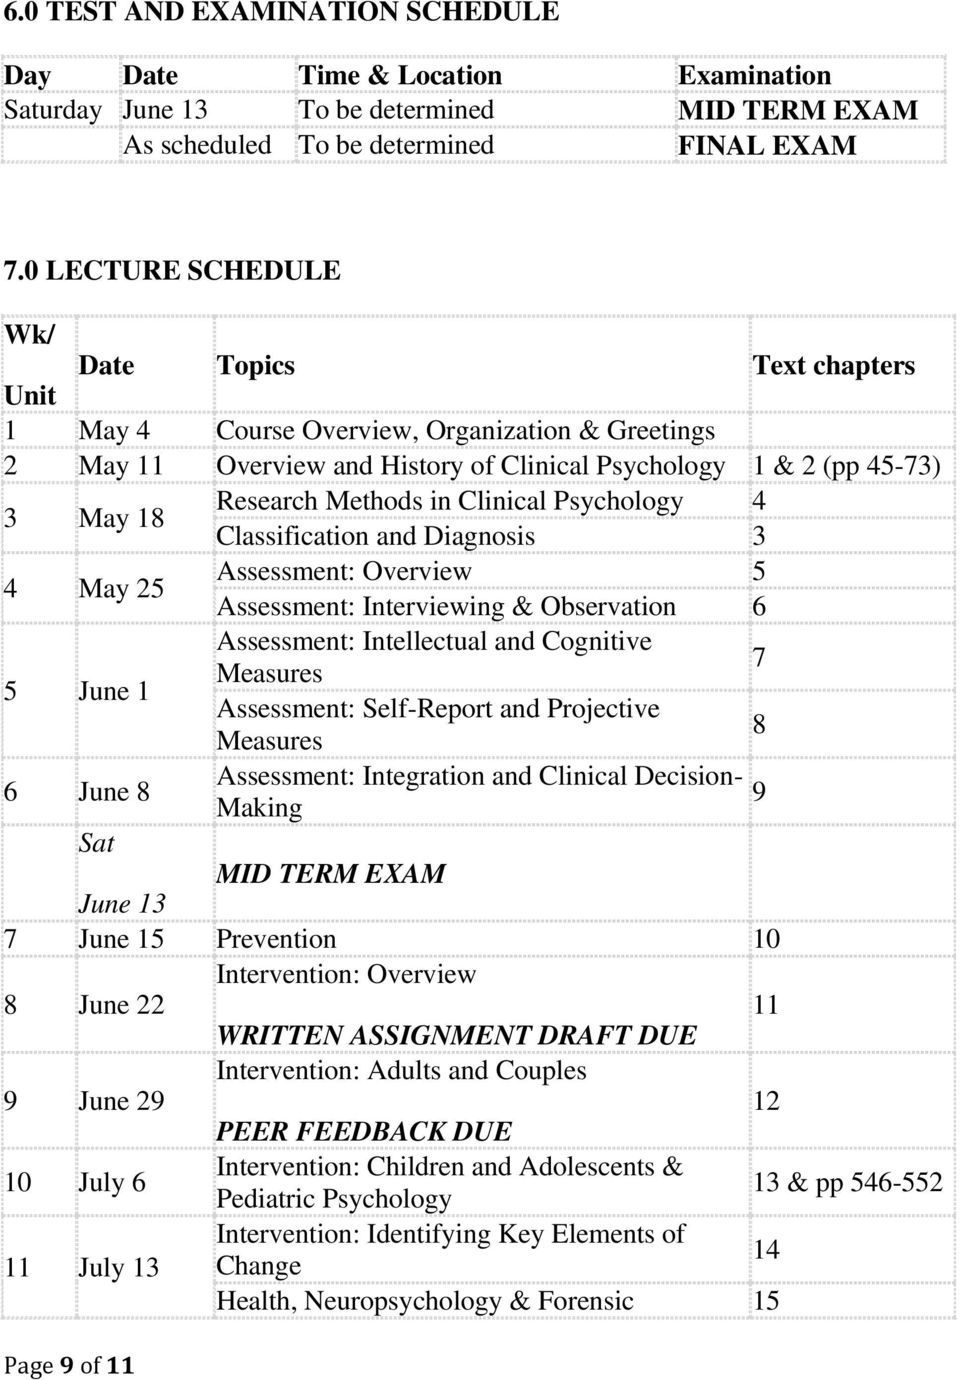 in Clinical Psychology 4 Classification and Diagnosis 3 4 May 25 Assessment: Overview 5 Assessment: Interviewing & Observation 6 5 June 1 Assessment: Intellectual and Cognitive Measures 7 Assessment: